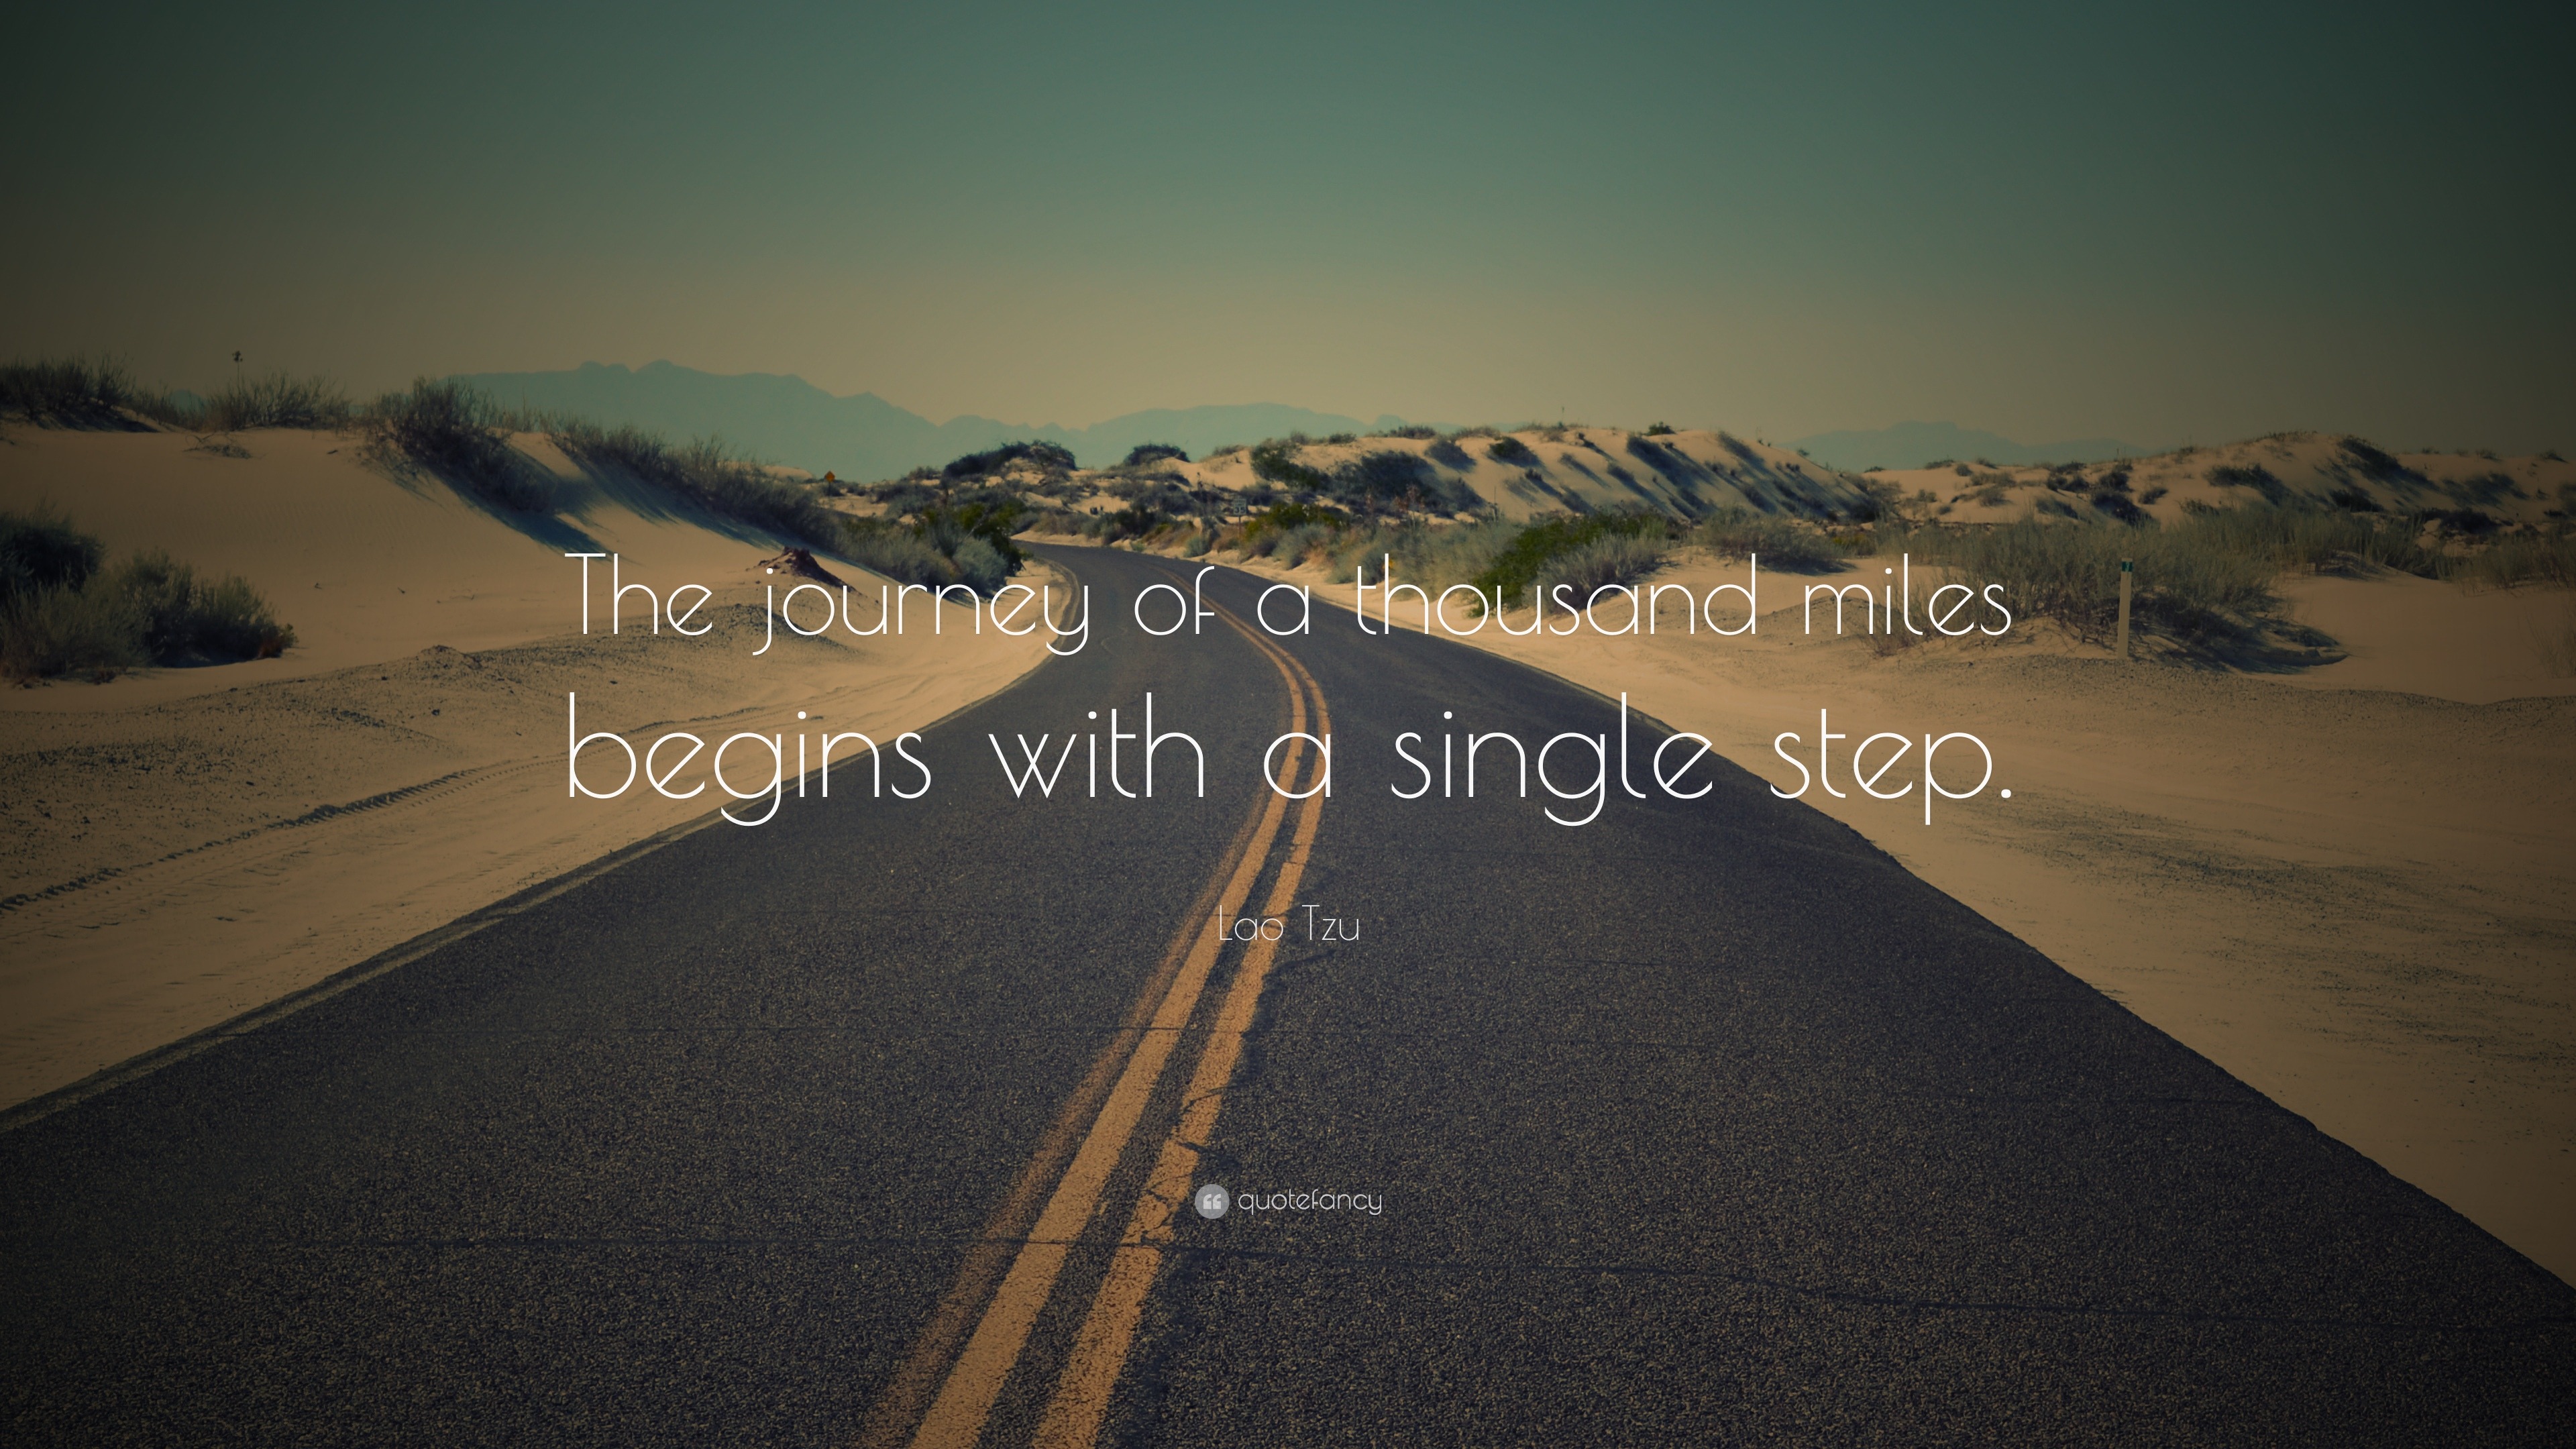 a 1000 mile journey begins with one step